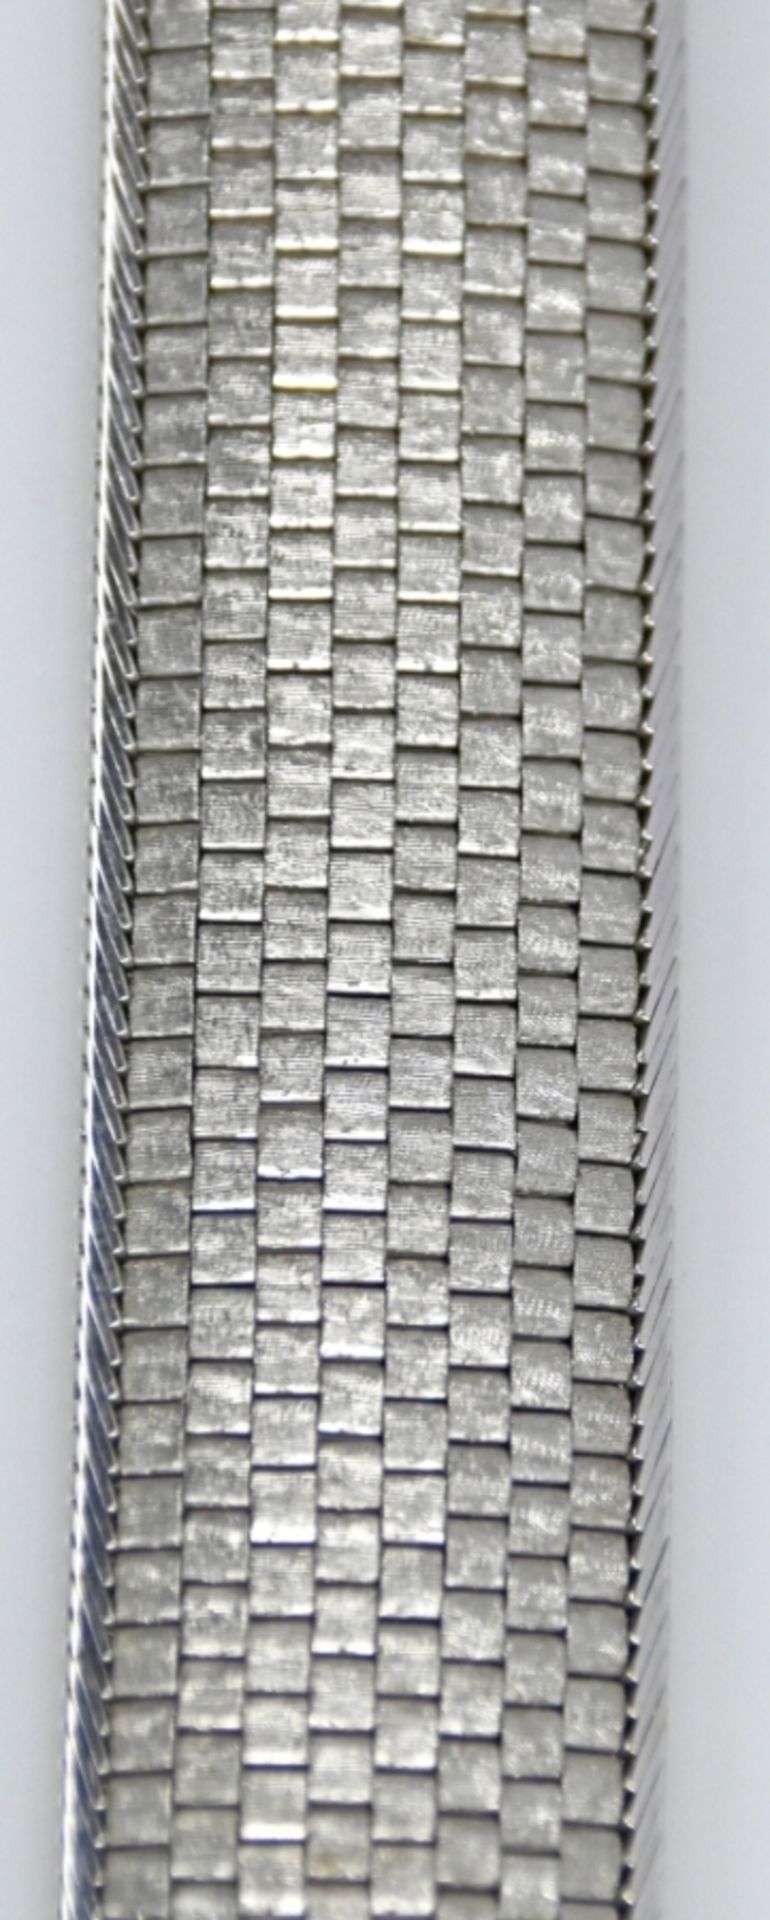 Wide bracelet made of satin-finished, eight-row links, with polished edge, wide shape, shiny on the - Image 3 of 3